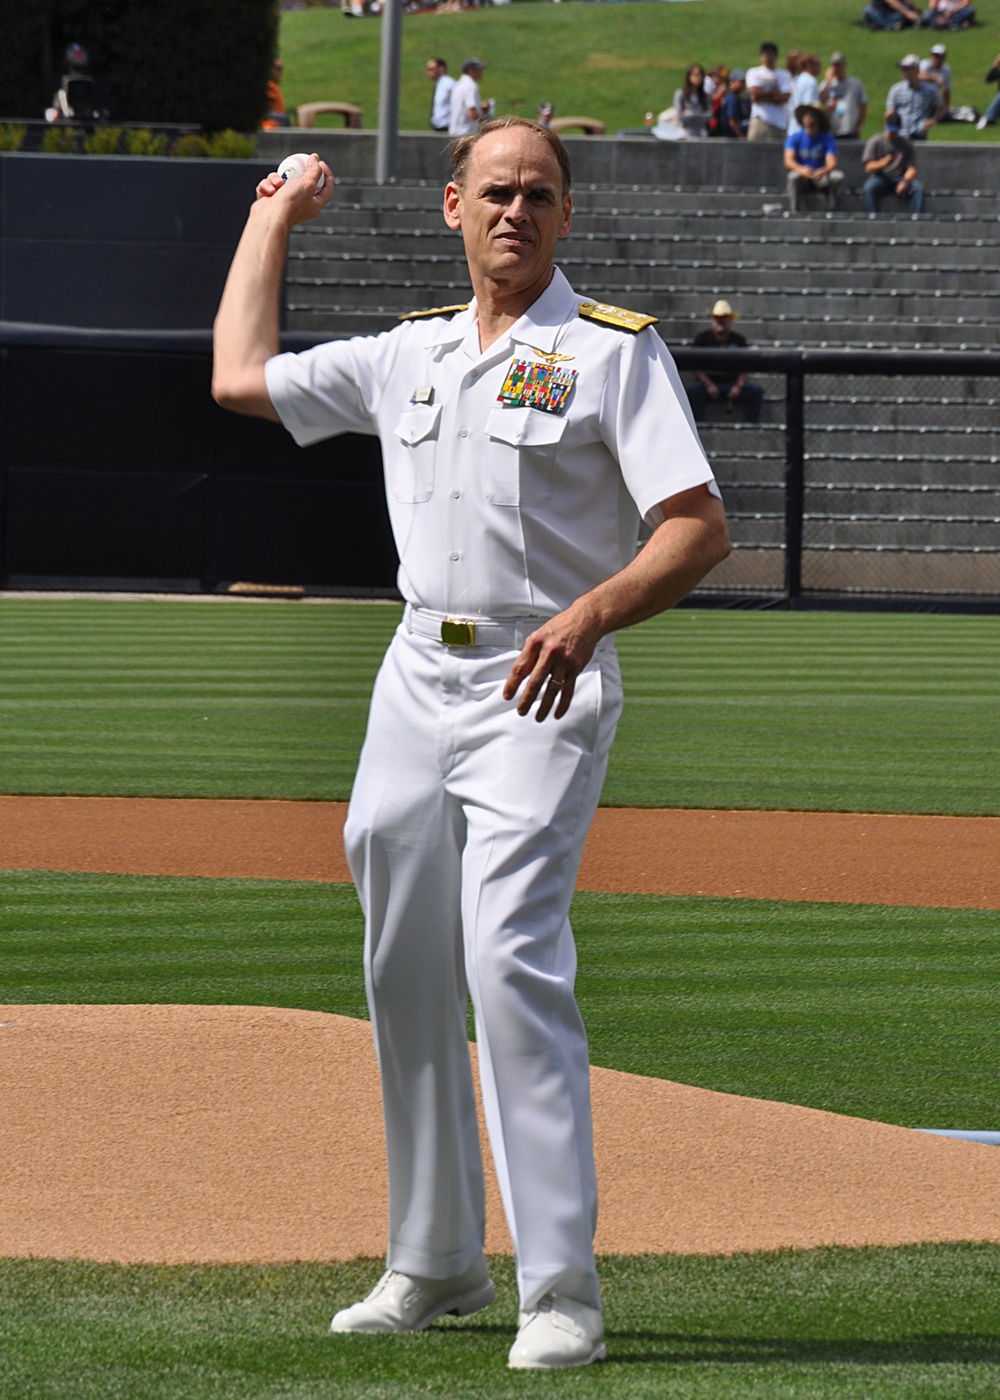 Admiral throws out pitch